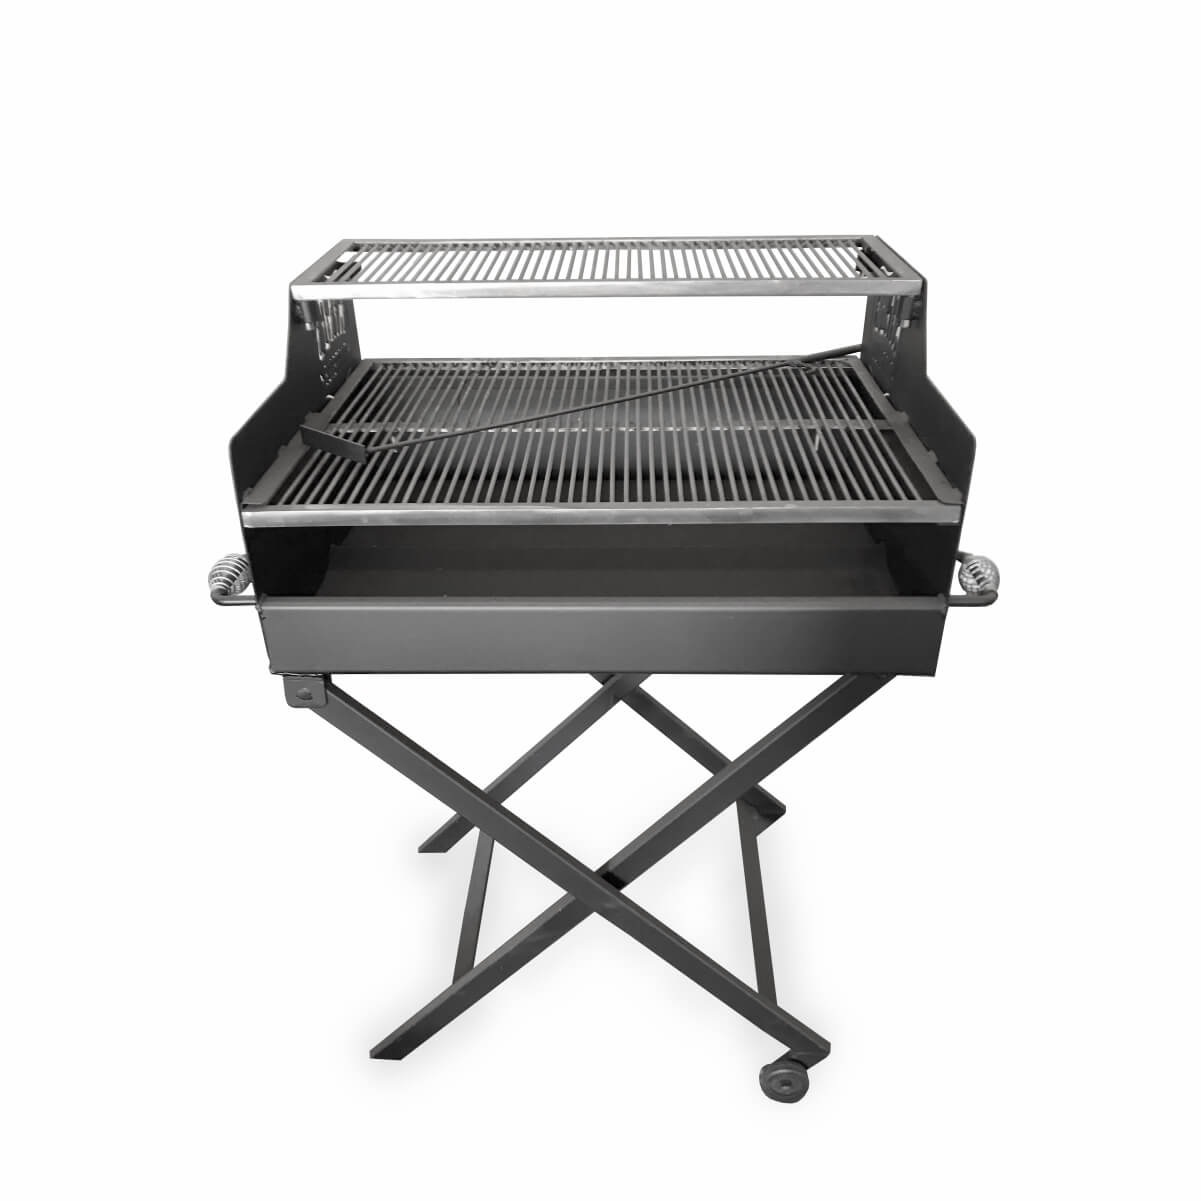 Parrilla Grill 600 Kings Barbecue